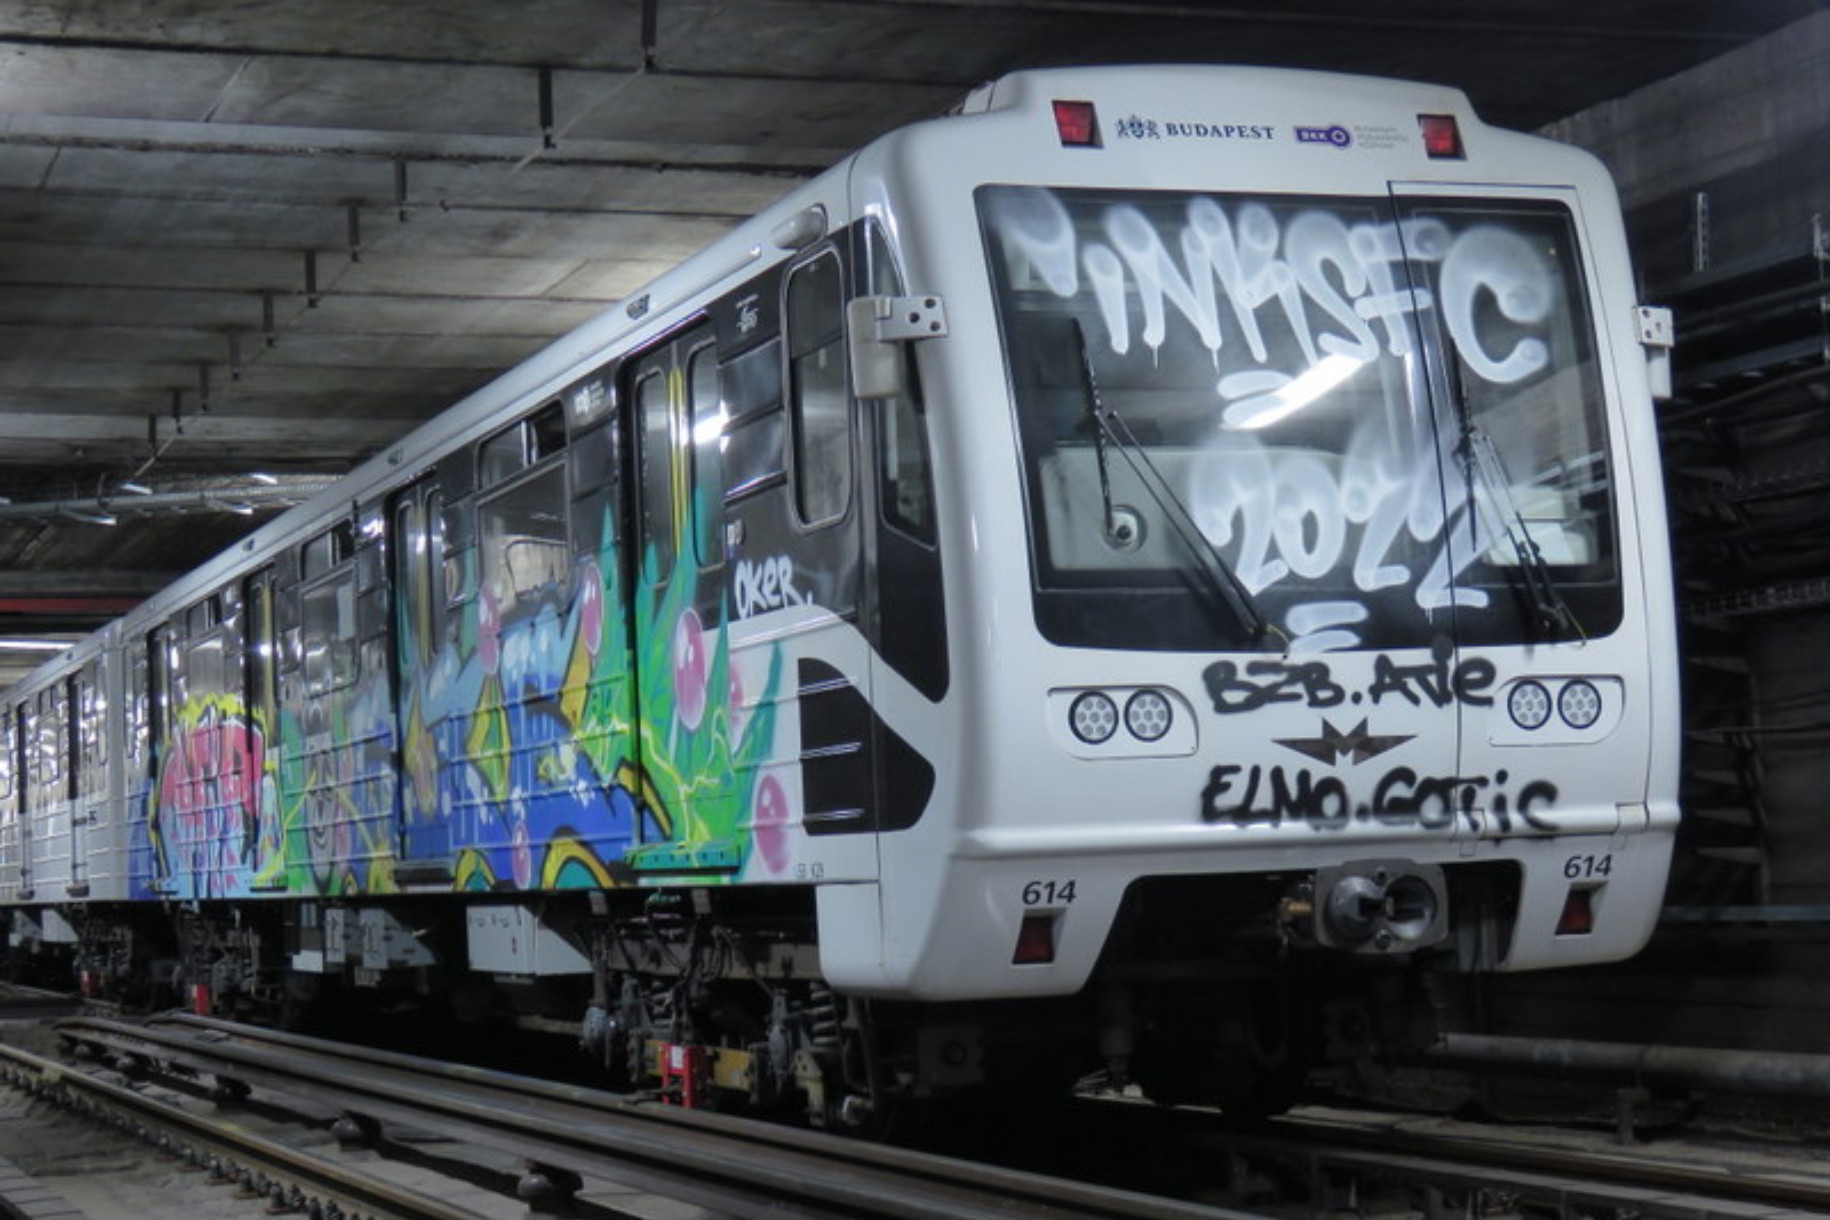 Foreign Vandals Arrested in Budapest for Creating HUF 1+ Million Damage to Metro Carriages